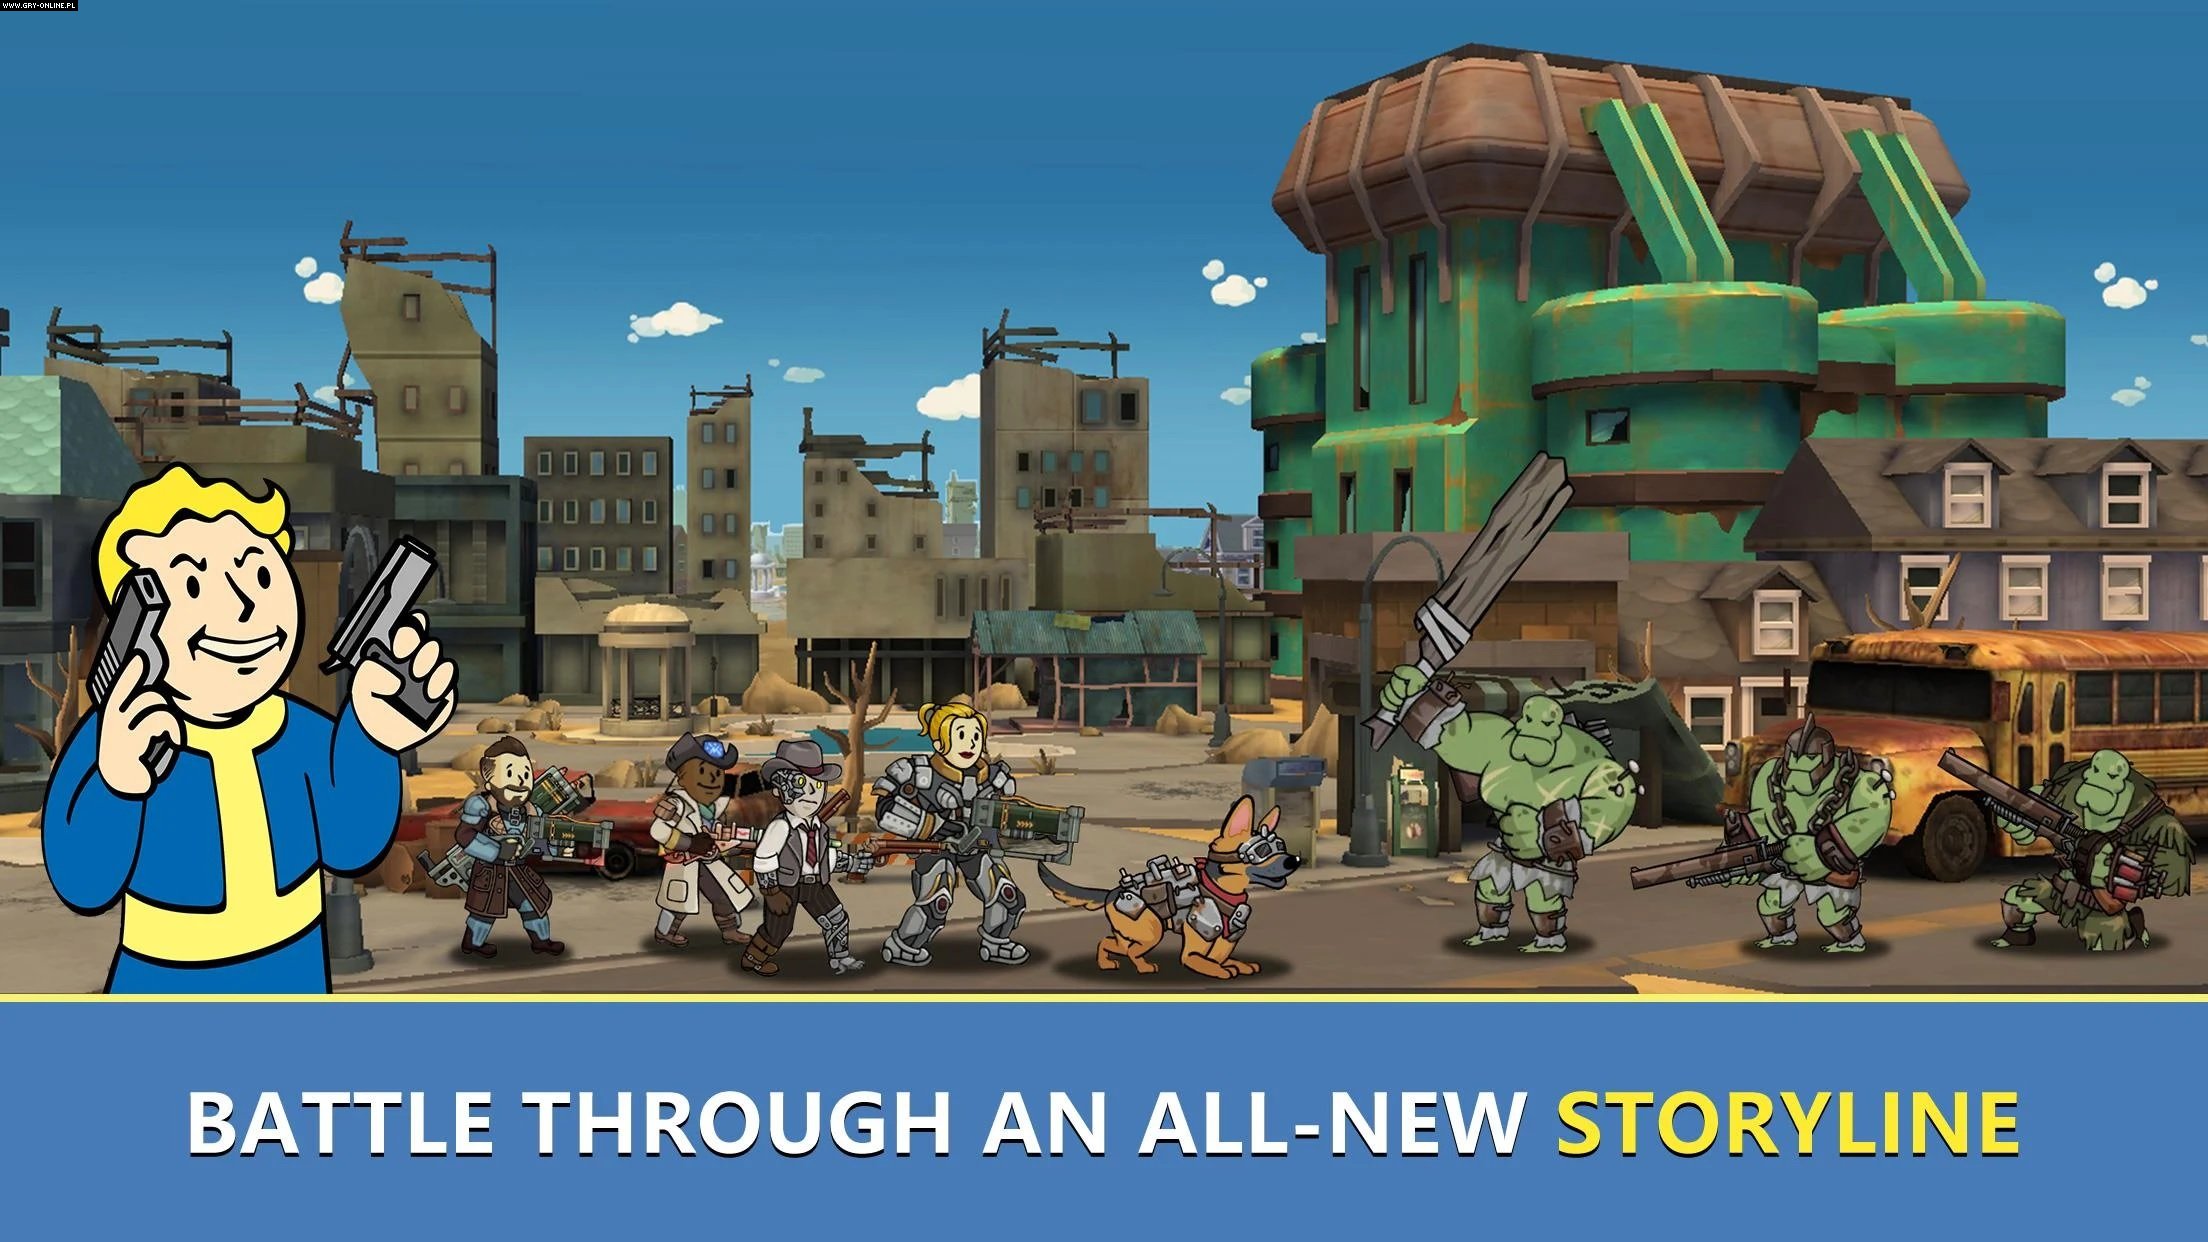 download free fallout shelter ps4